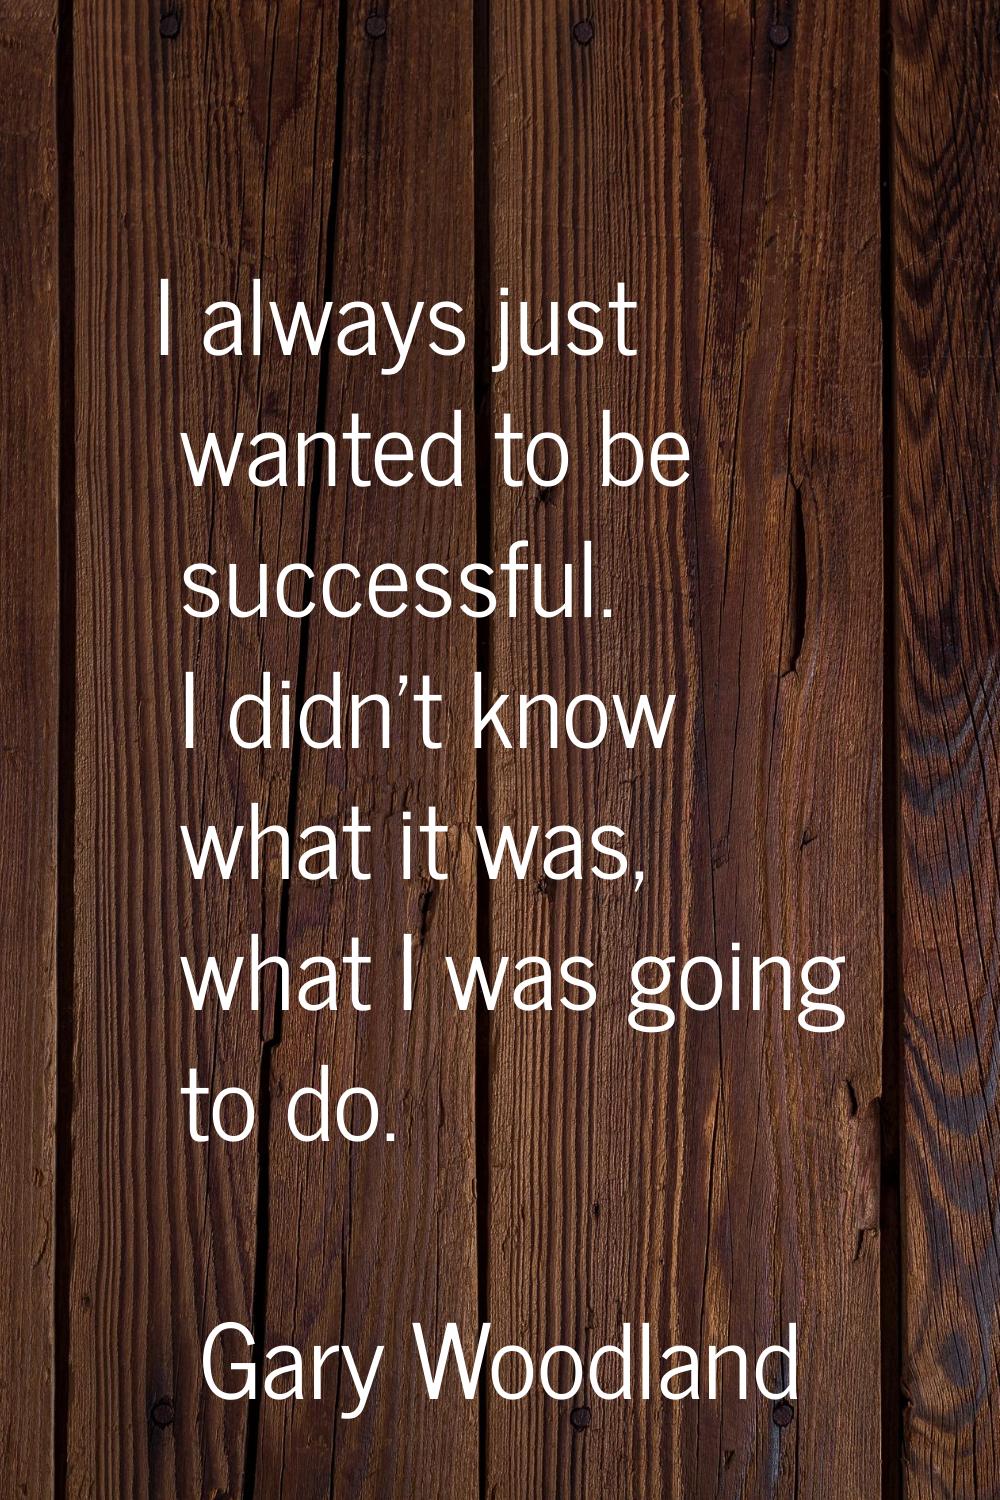 I always just wanted to be successful. I didn't know what it was, what I was going to do.